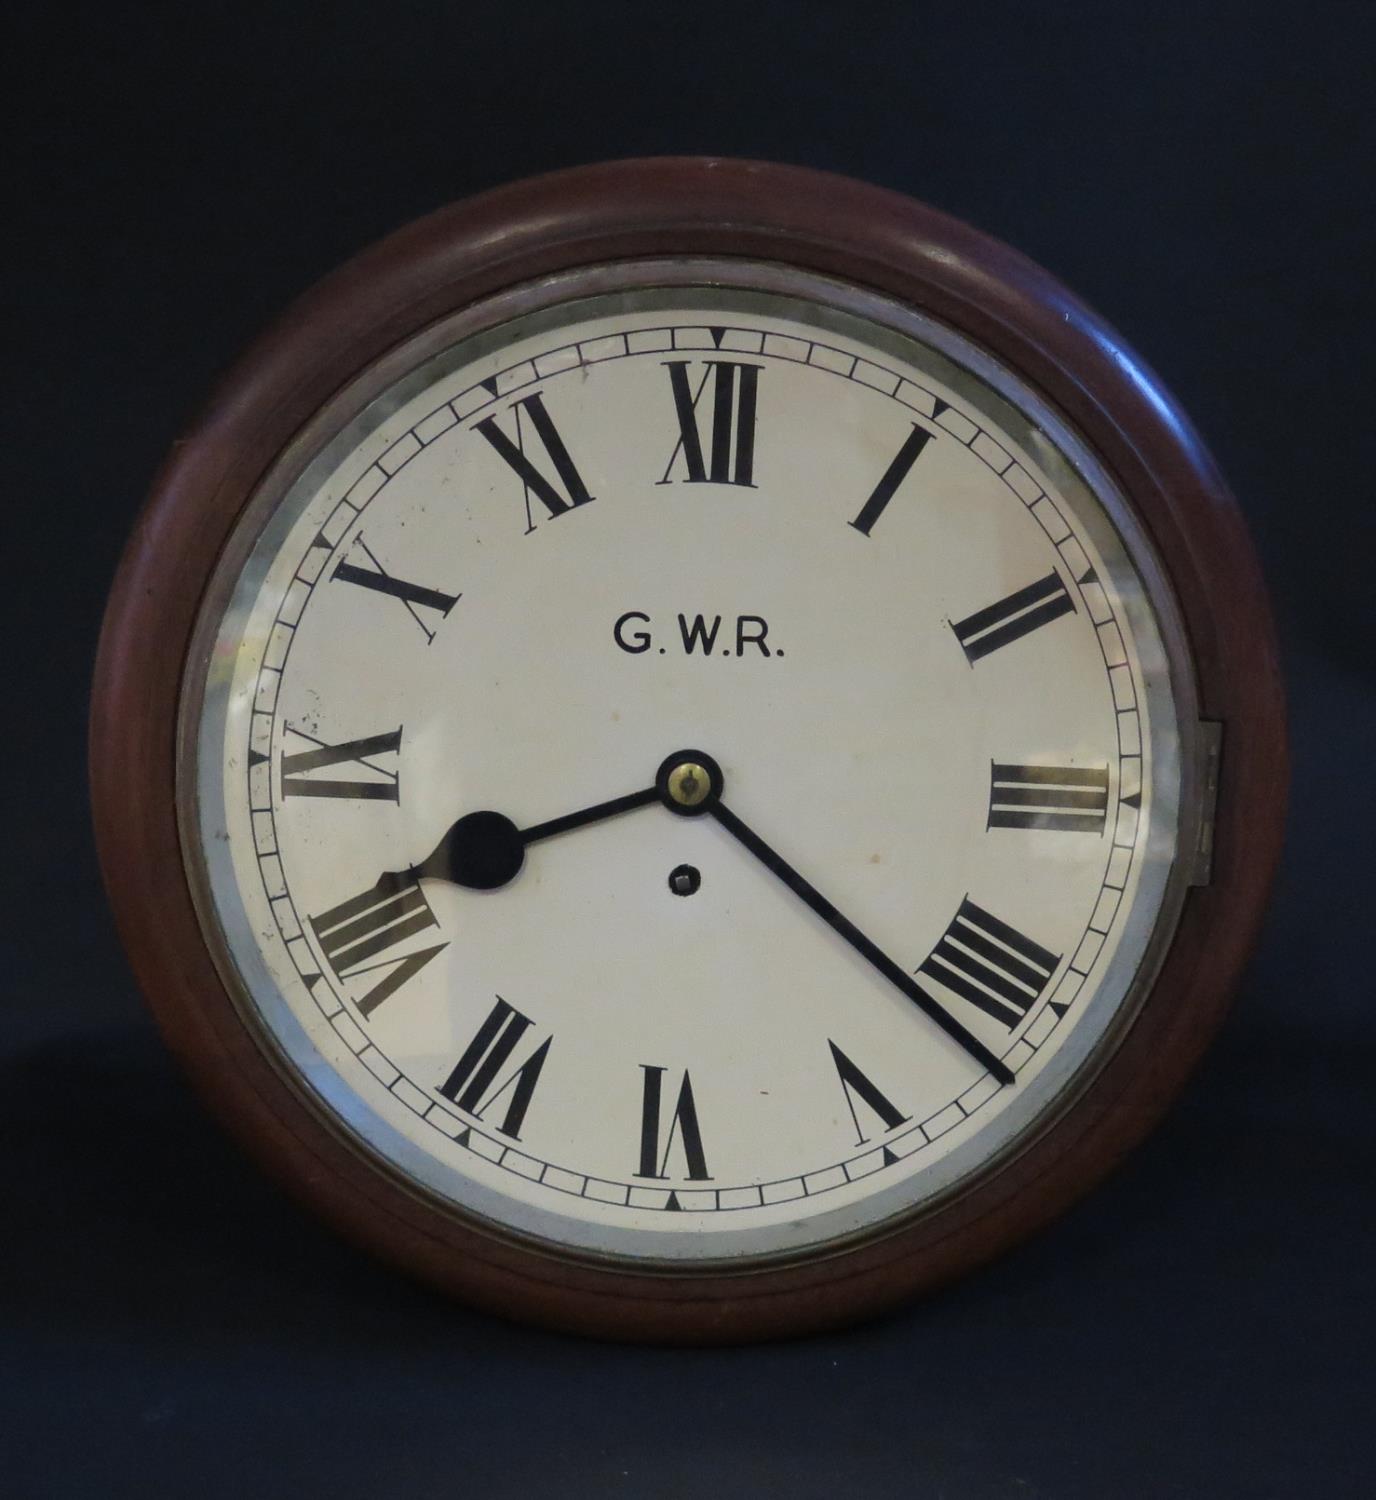 A Rare Twin Dial Railway Station Clock with dial marked G.W.R. a single chain driven fusee movement - Image 5 of 5